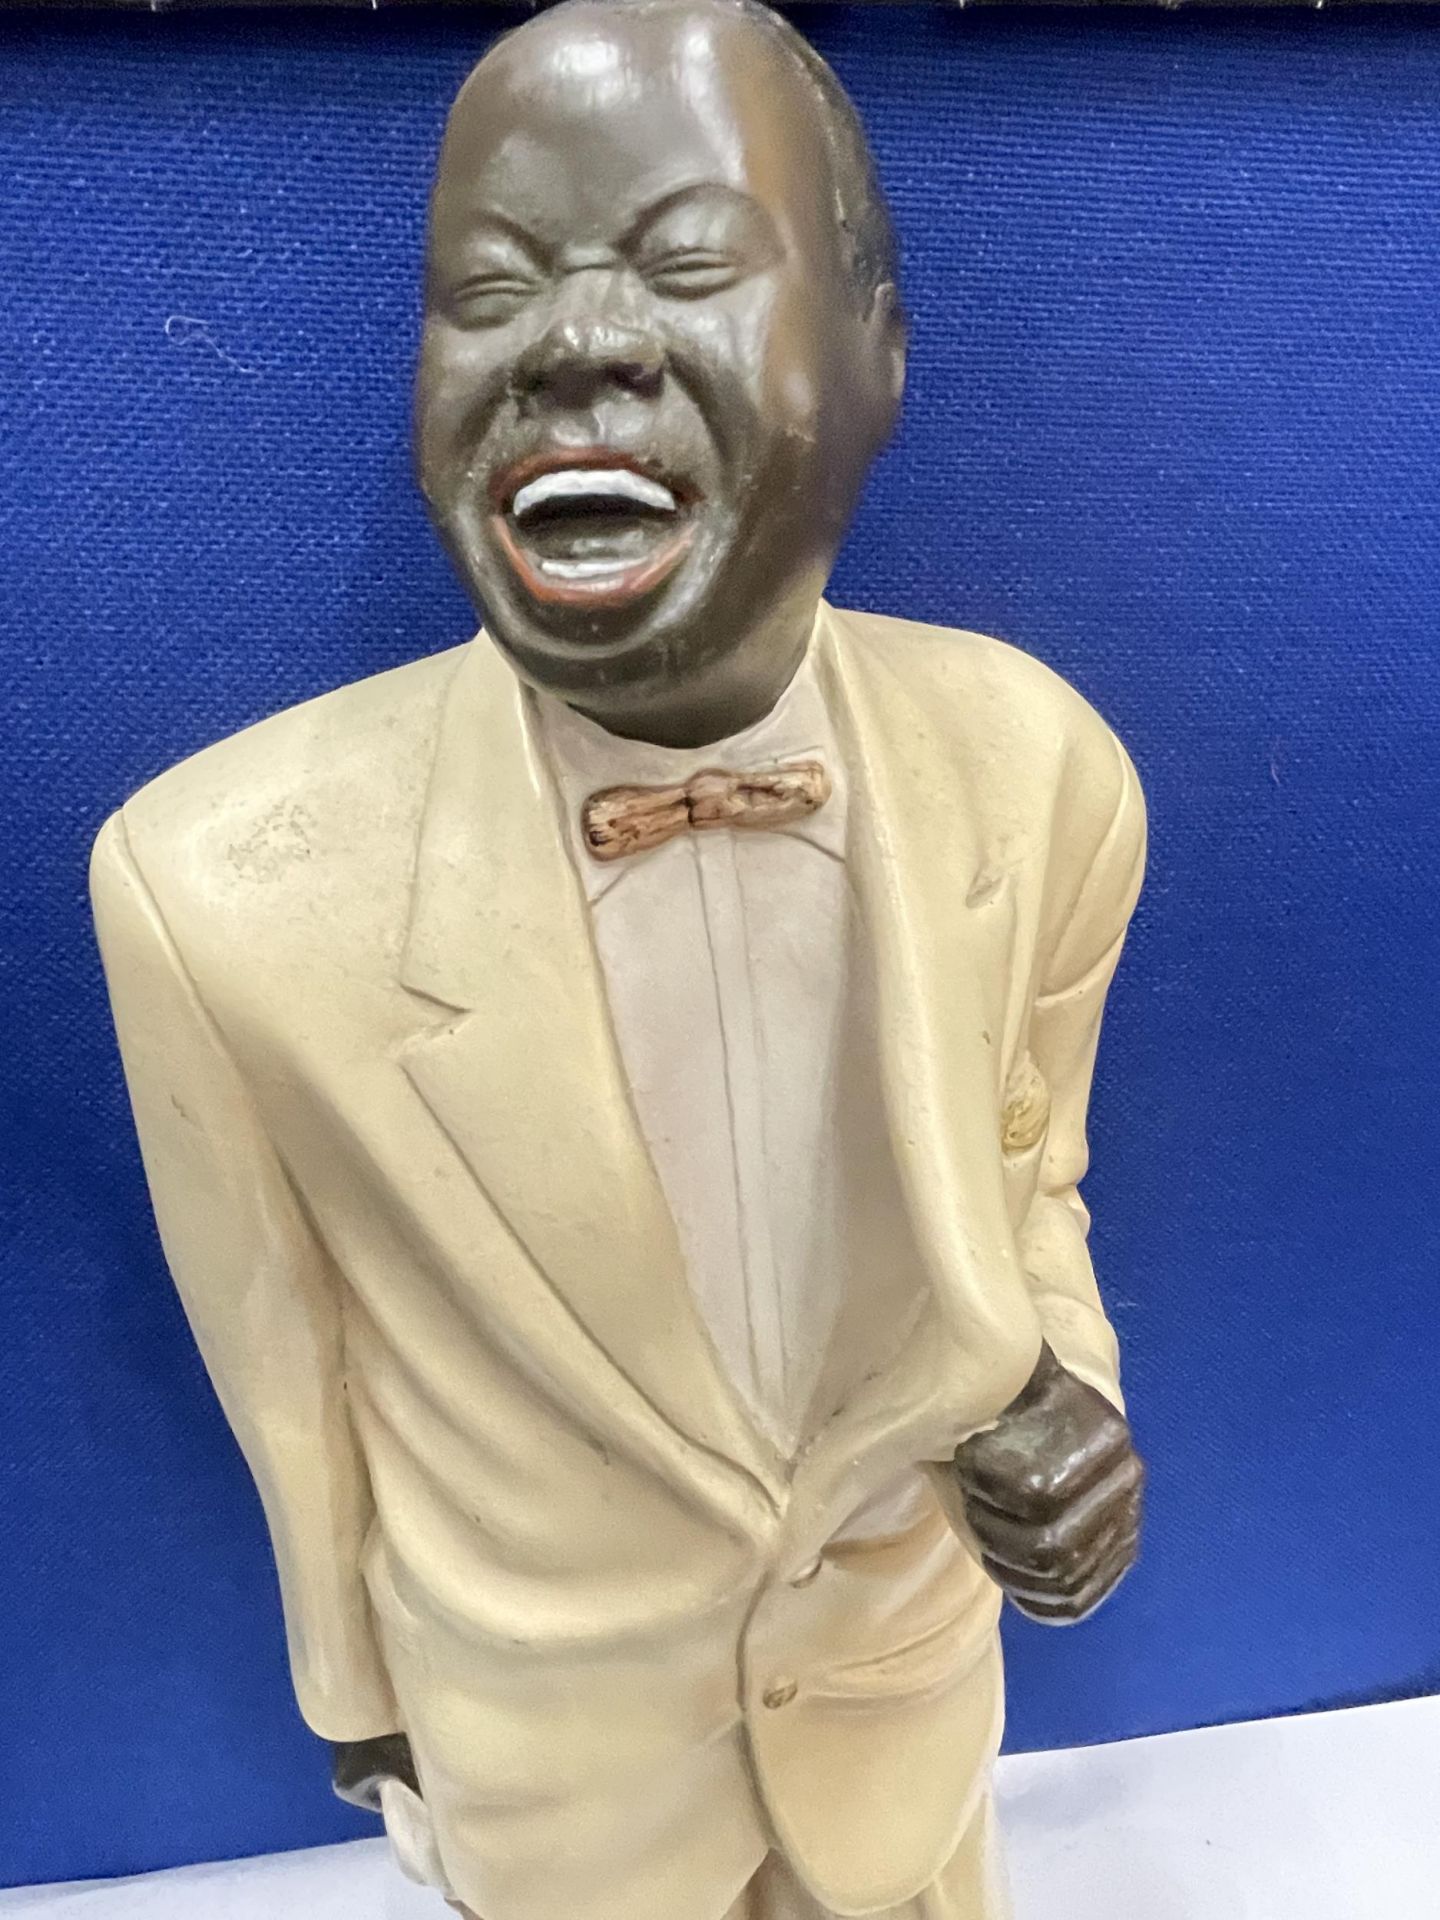 A HEAVY LOUIS ARMSTRONG FIGURE WITH TRUMPET AND MICROPHONE 22 INCHES TALL - Image 2 of 4